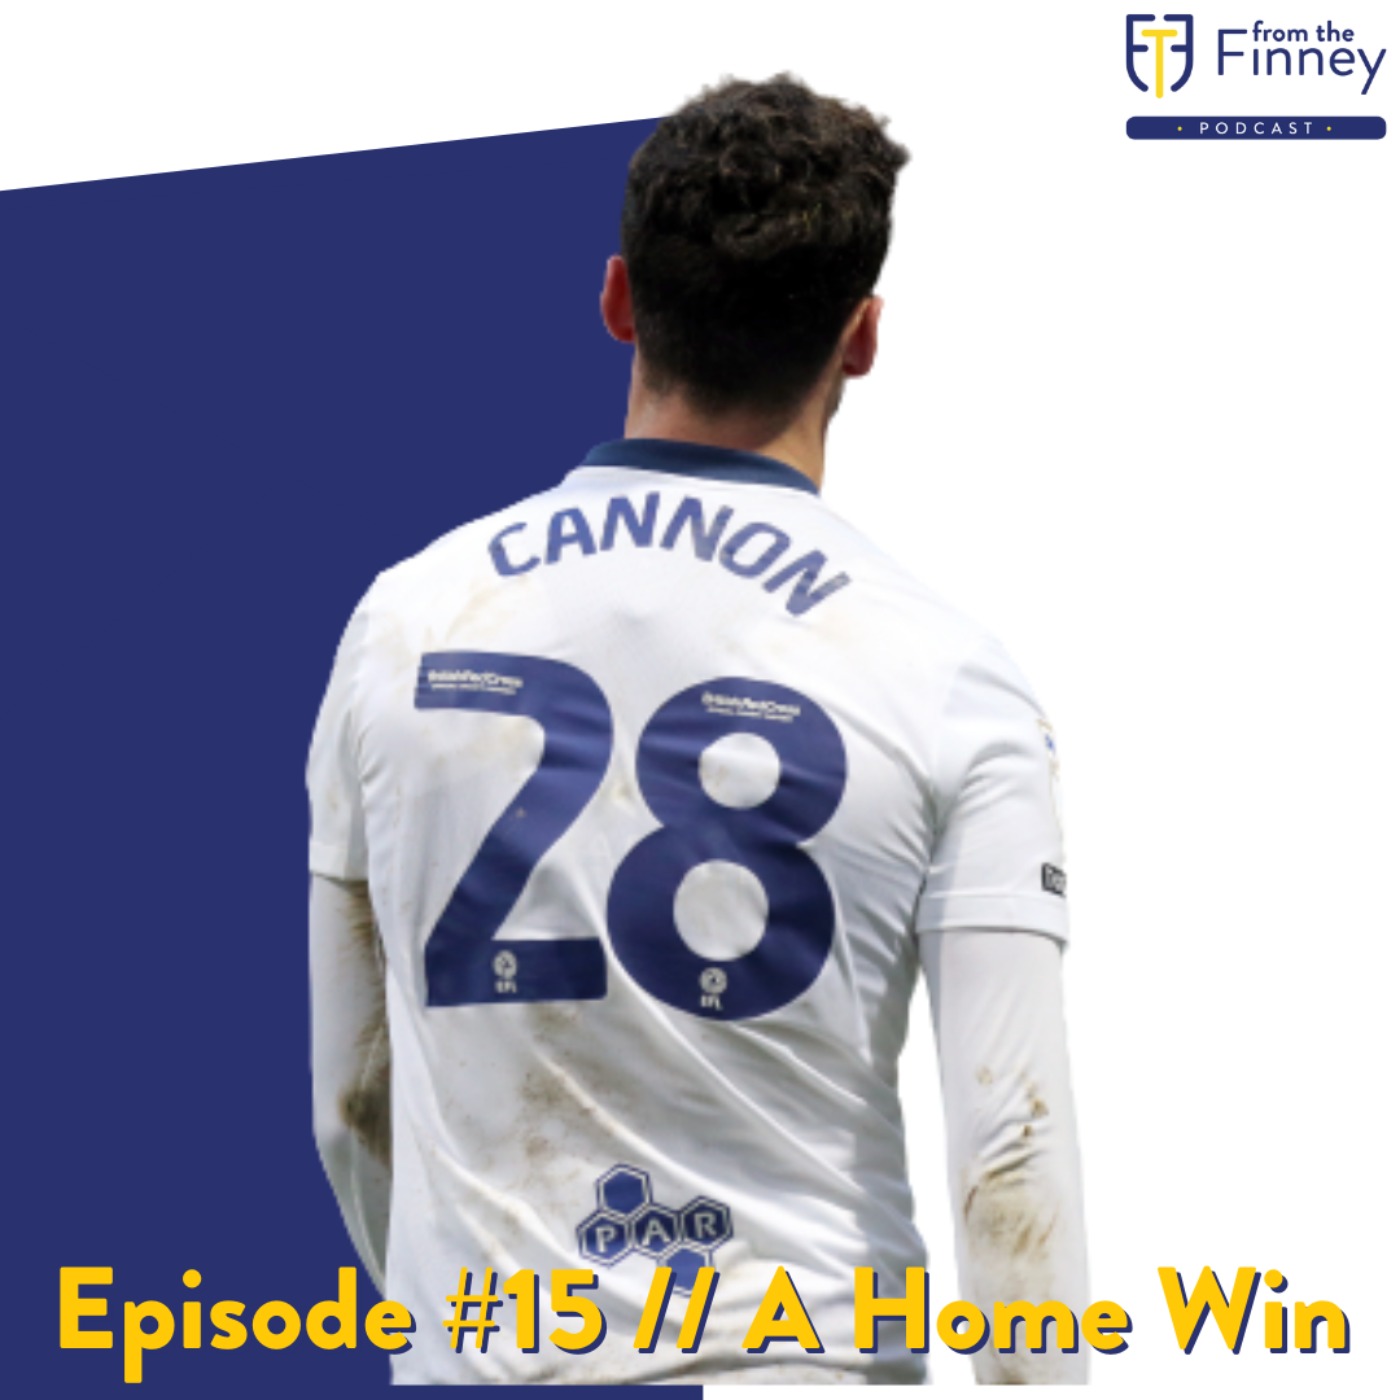 Episode #15 // A Home Win // From the Finney Podcast